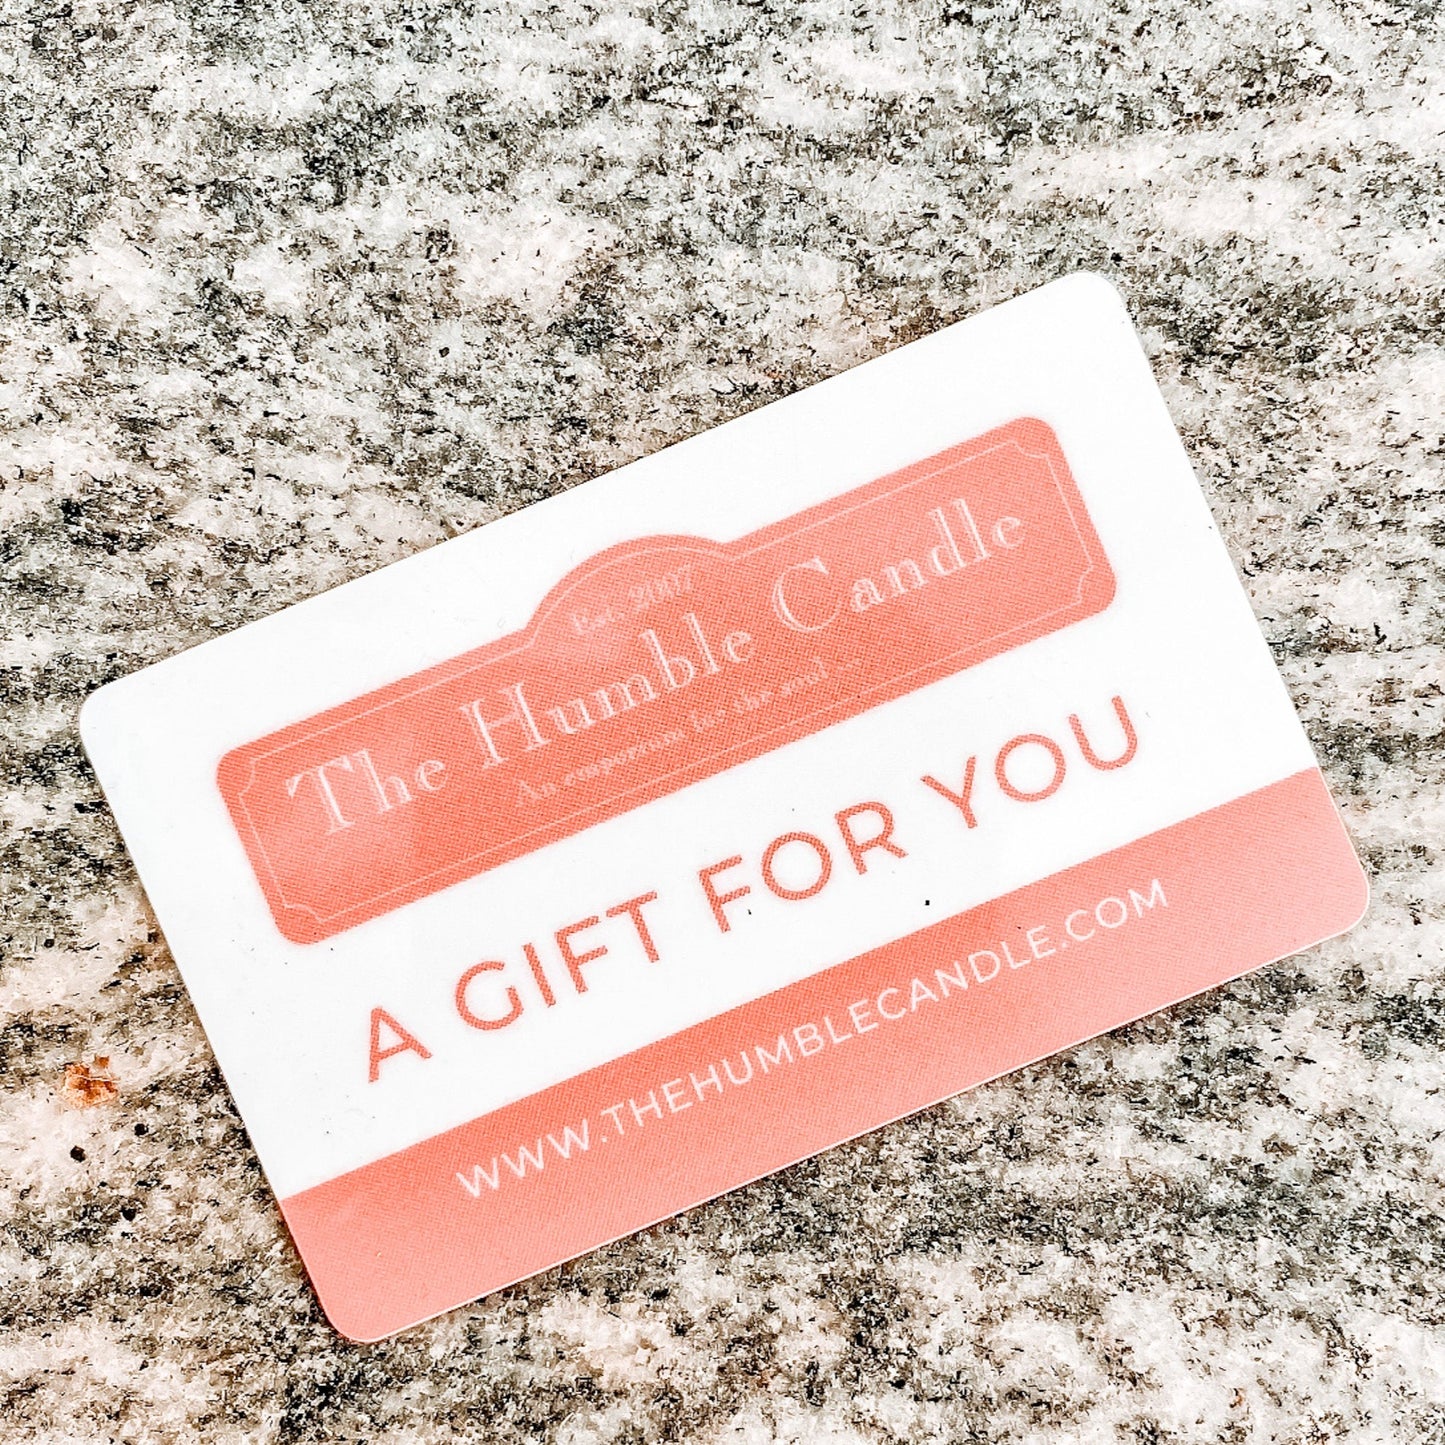 Humble Candle Gift Cards